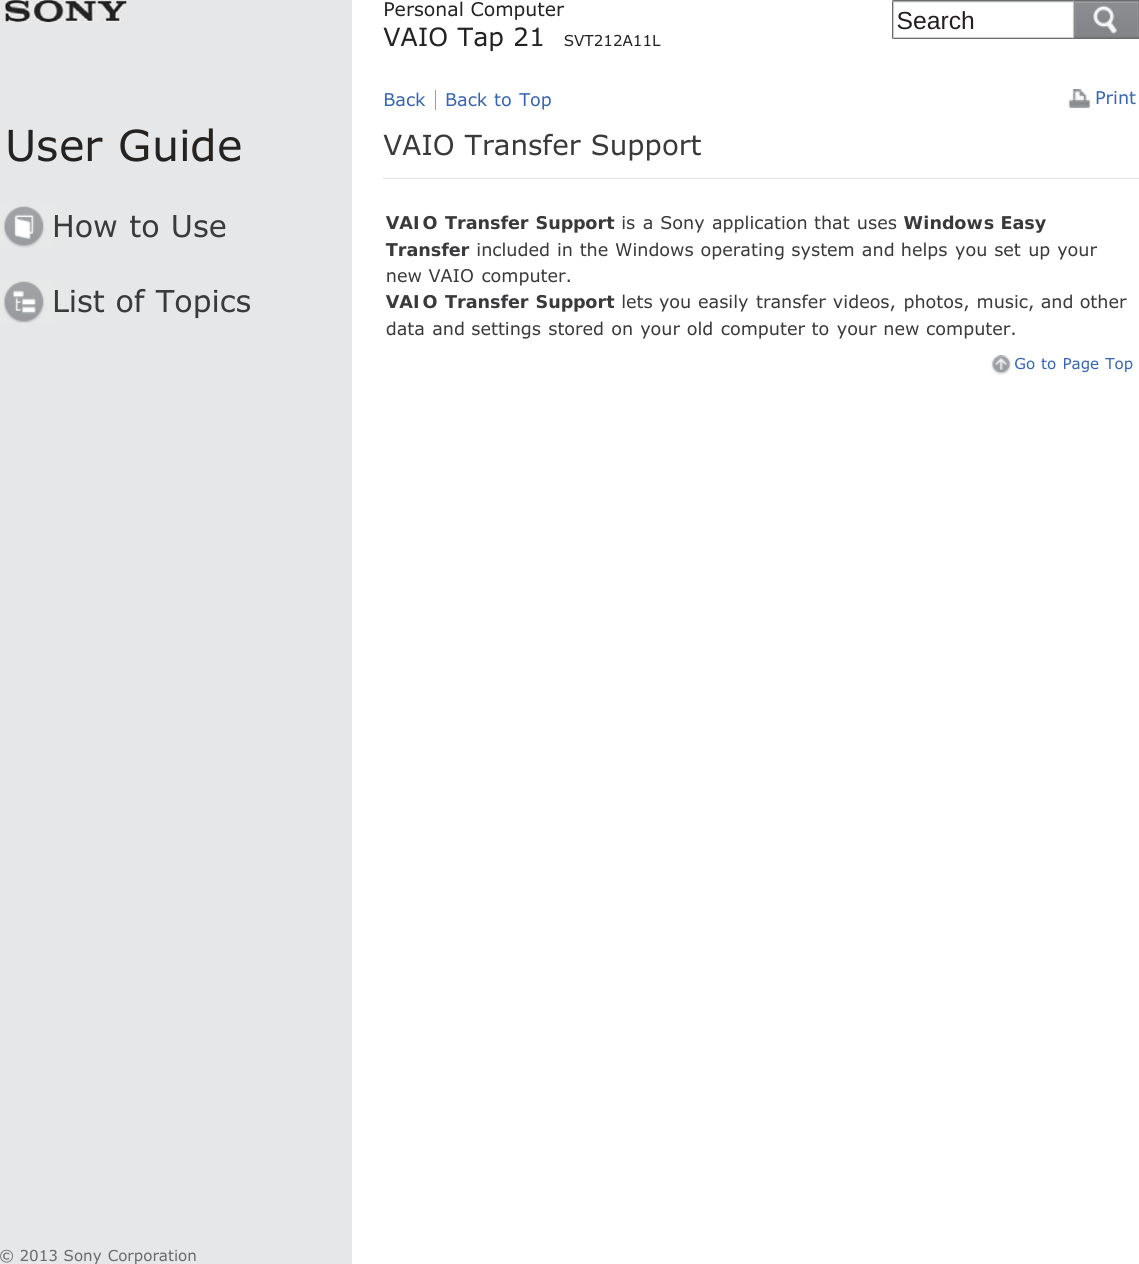 User GuideHow to UseList of TopicsPrintPersonal ComputerVAIO Tap 21  SVT212A11LVAIO Transfer SupportVAIO Transfer Support is a Sony application that uses Windows EasyTransfer included in the Windows operating system and helps you set up yournew VAIO computer.VAIO Transfer Support lets you easily transfer videos, photos, music, and otherdata and settings stored on your old computer to your new computer.Go to Page TopBack Back to Top© 2013 Sony CorporationSearch